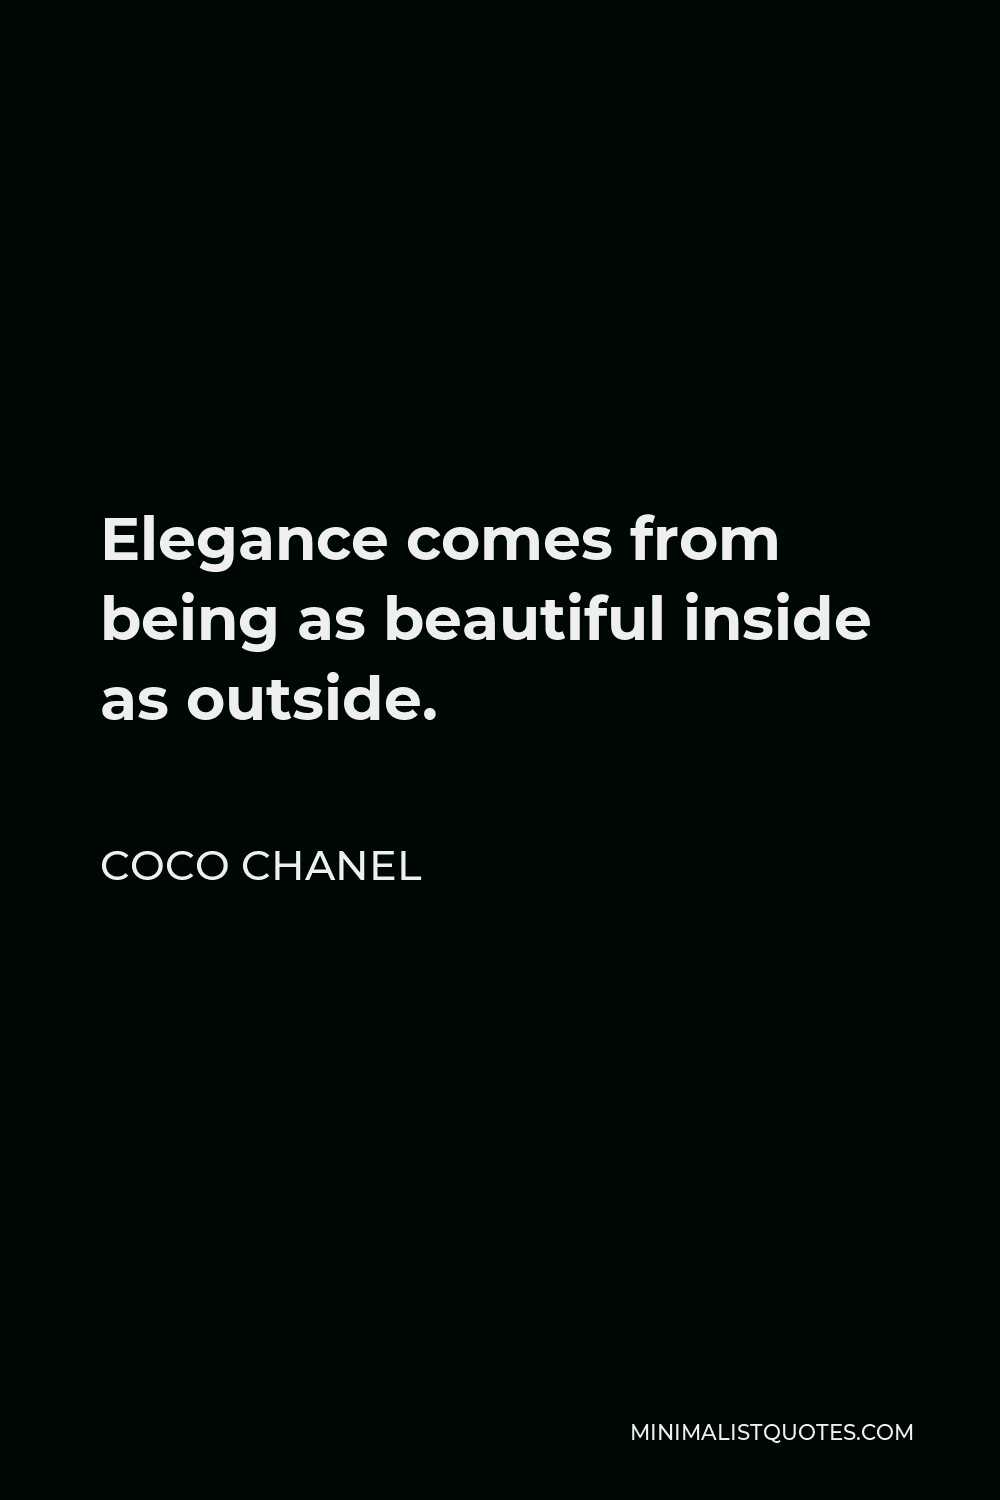 Coco Chanel Quote: Elegance from being beautiful inside outside.